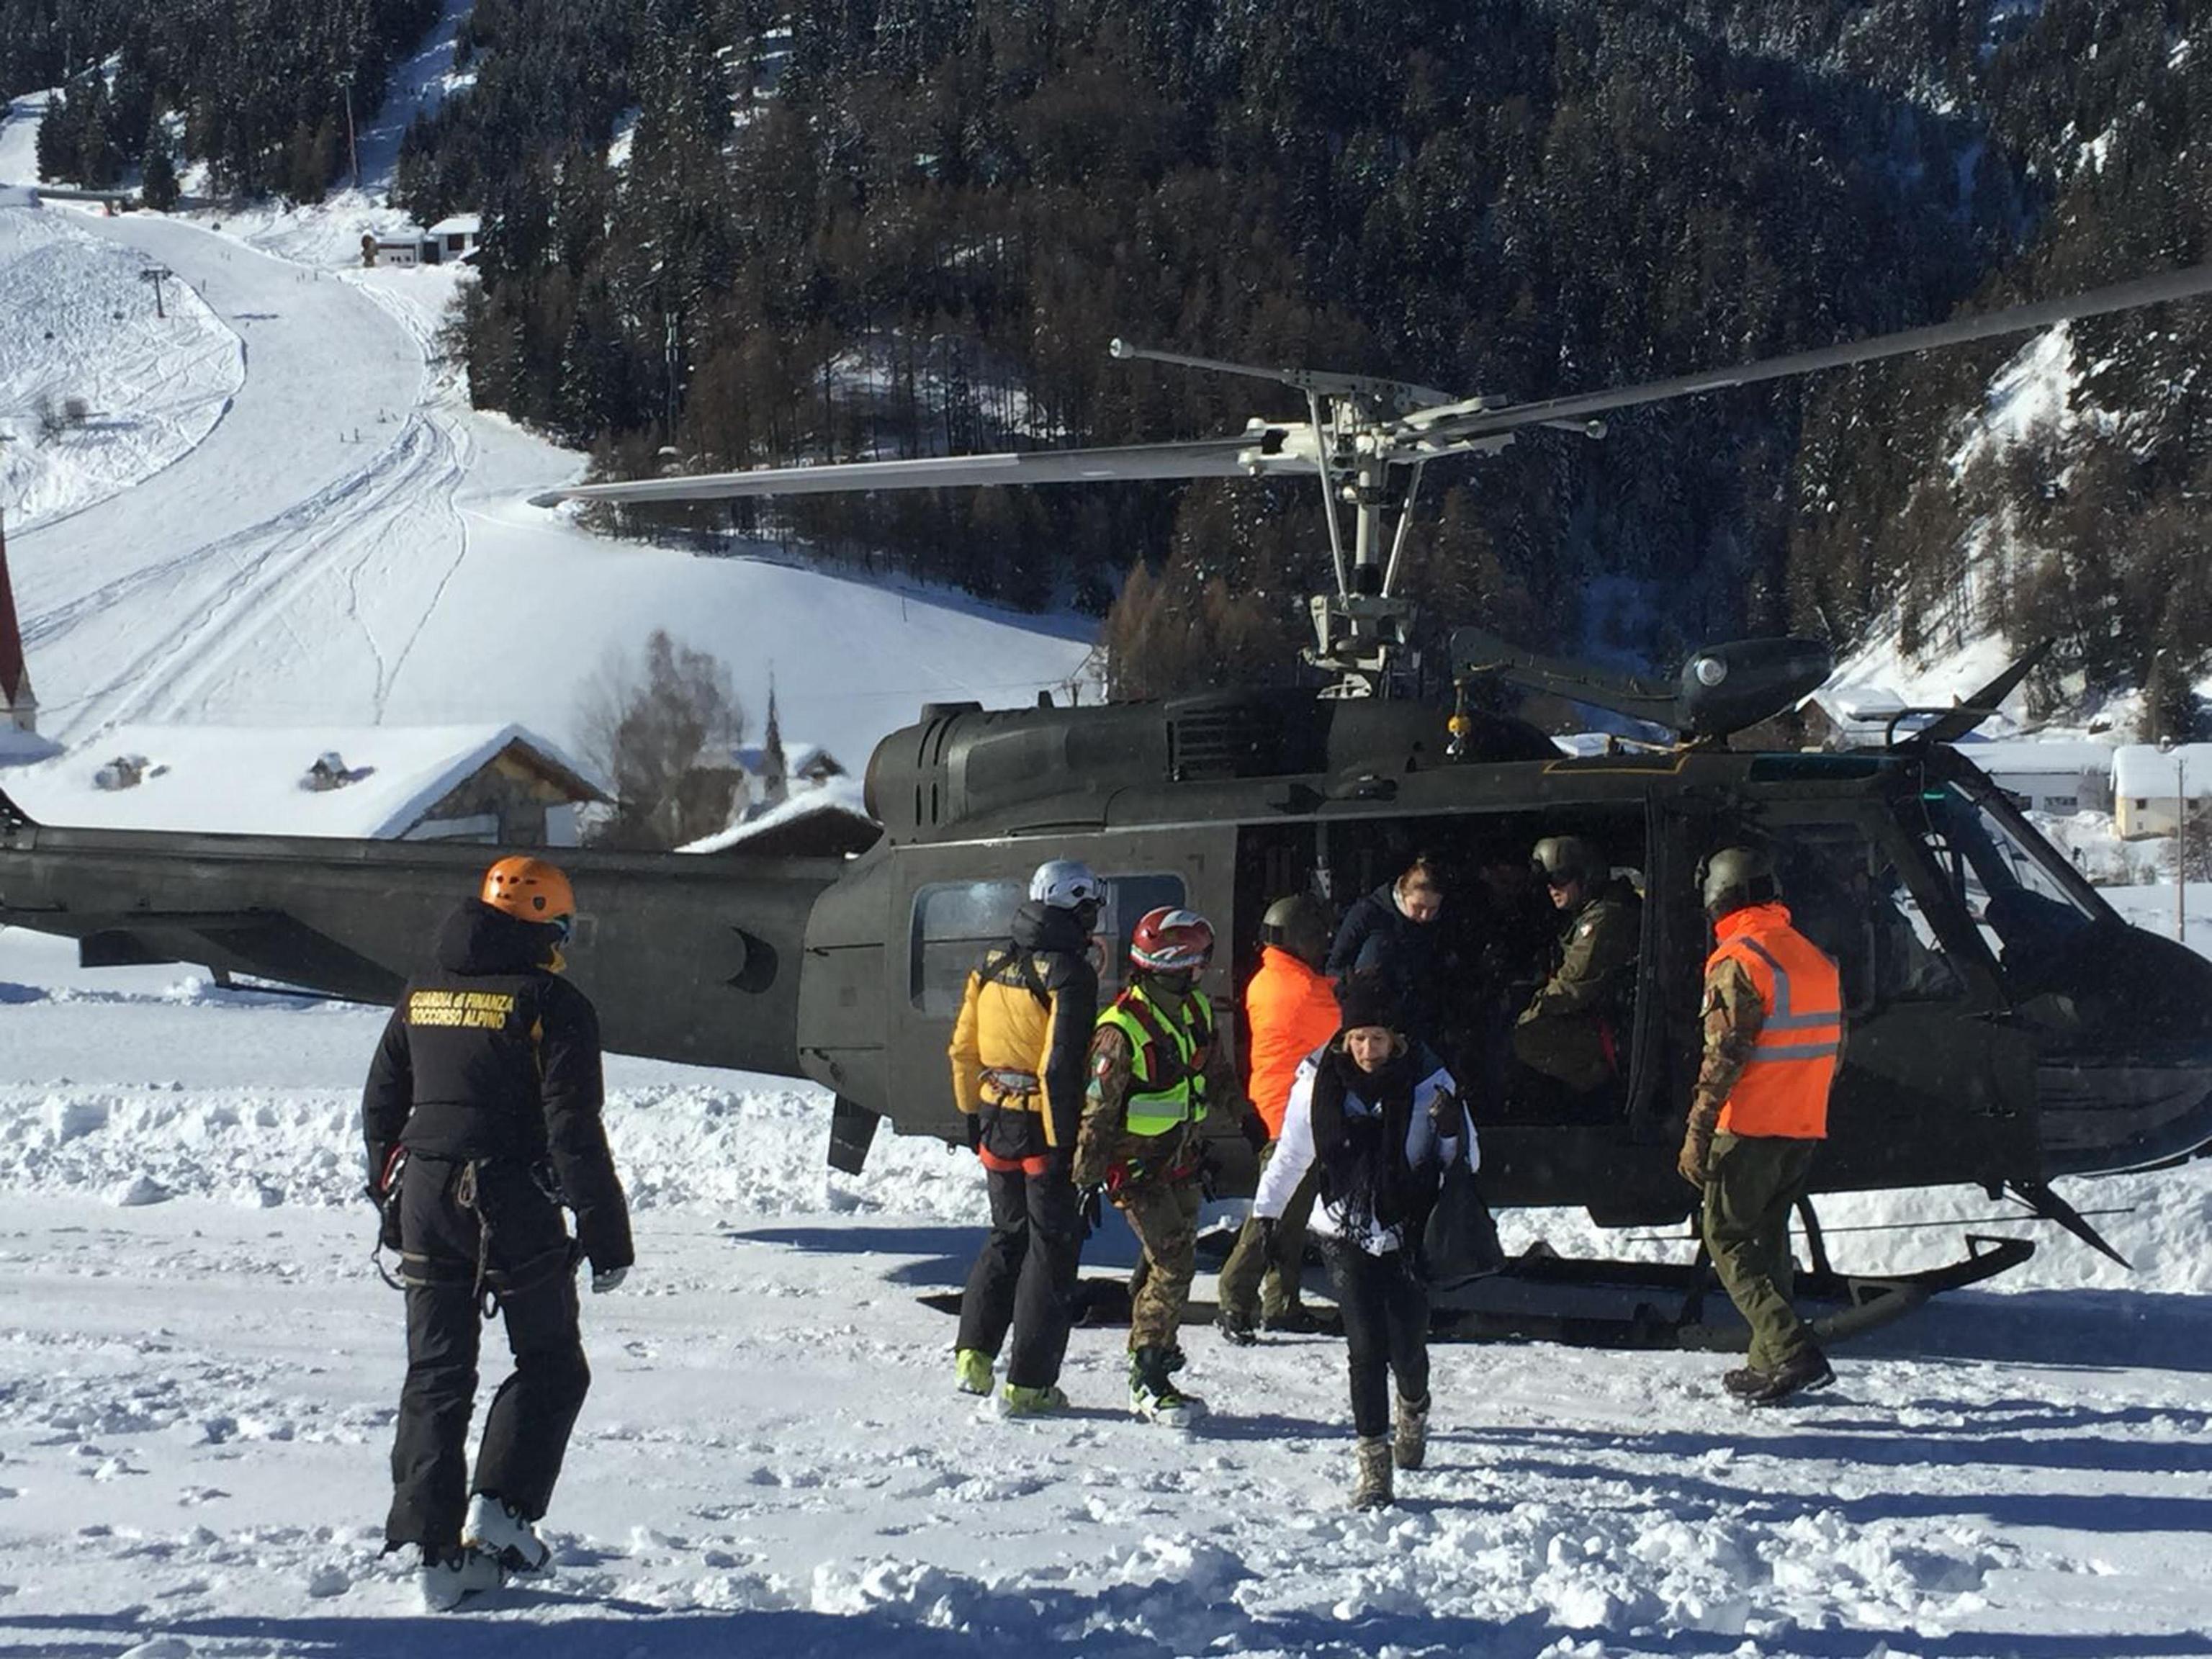 An Italian army helicopter lands during the evacuation of guests and tourists of the Langtauferer hotel in the Venosta valley, northern Italy (Italian Army via AP)